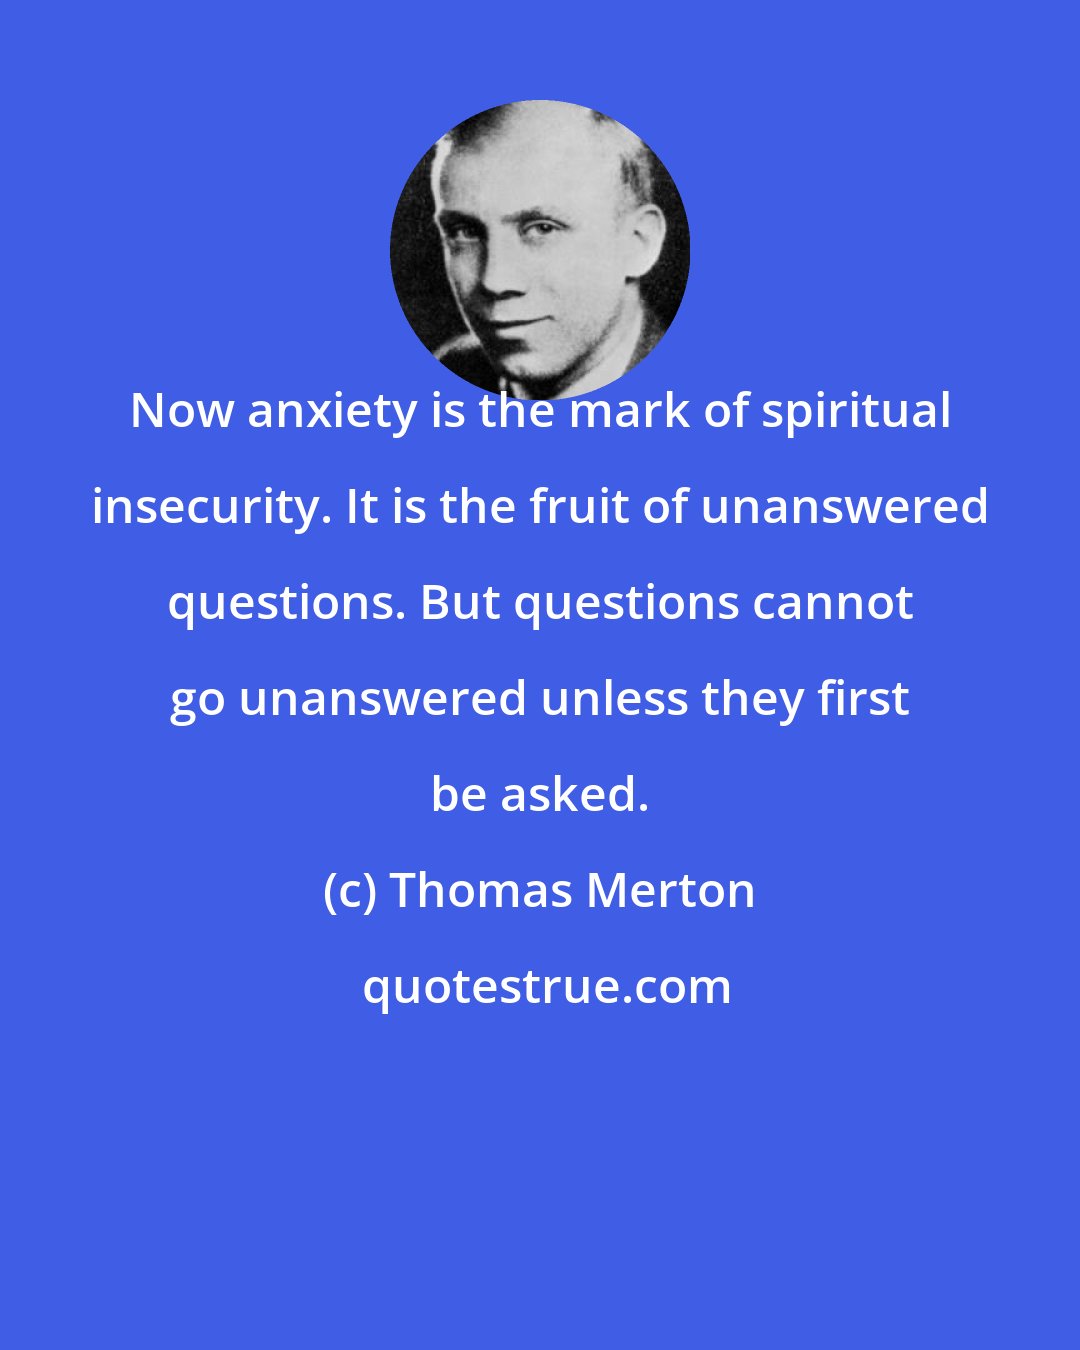 Thomas Merton: Now anxiety is the mark of spiritual insecurity. It is the fruit of unanswered questions. But questions cannot go unanswered unless they first be asked.